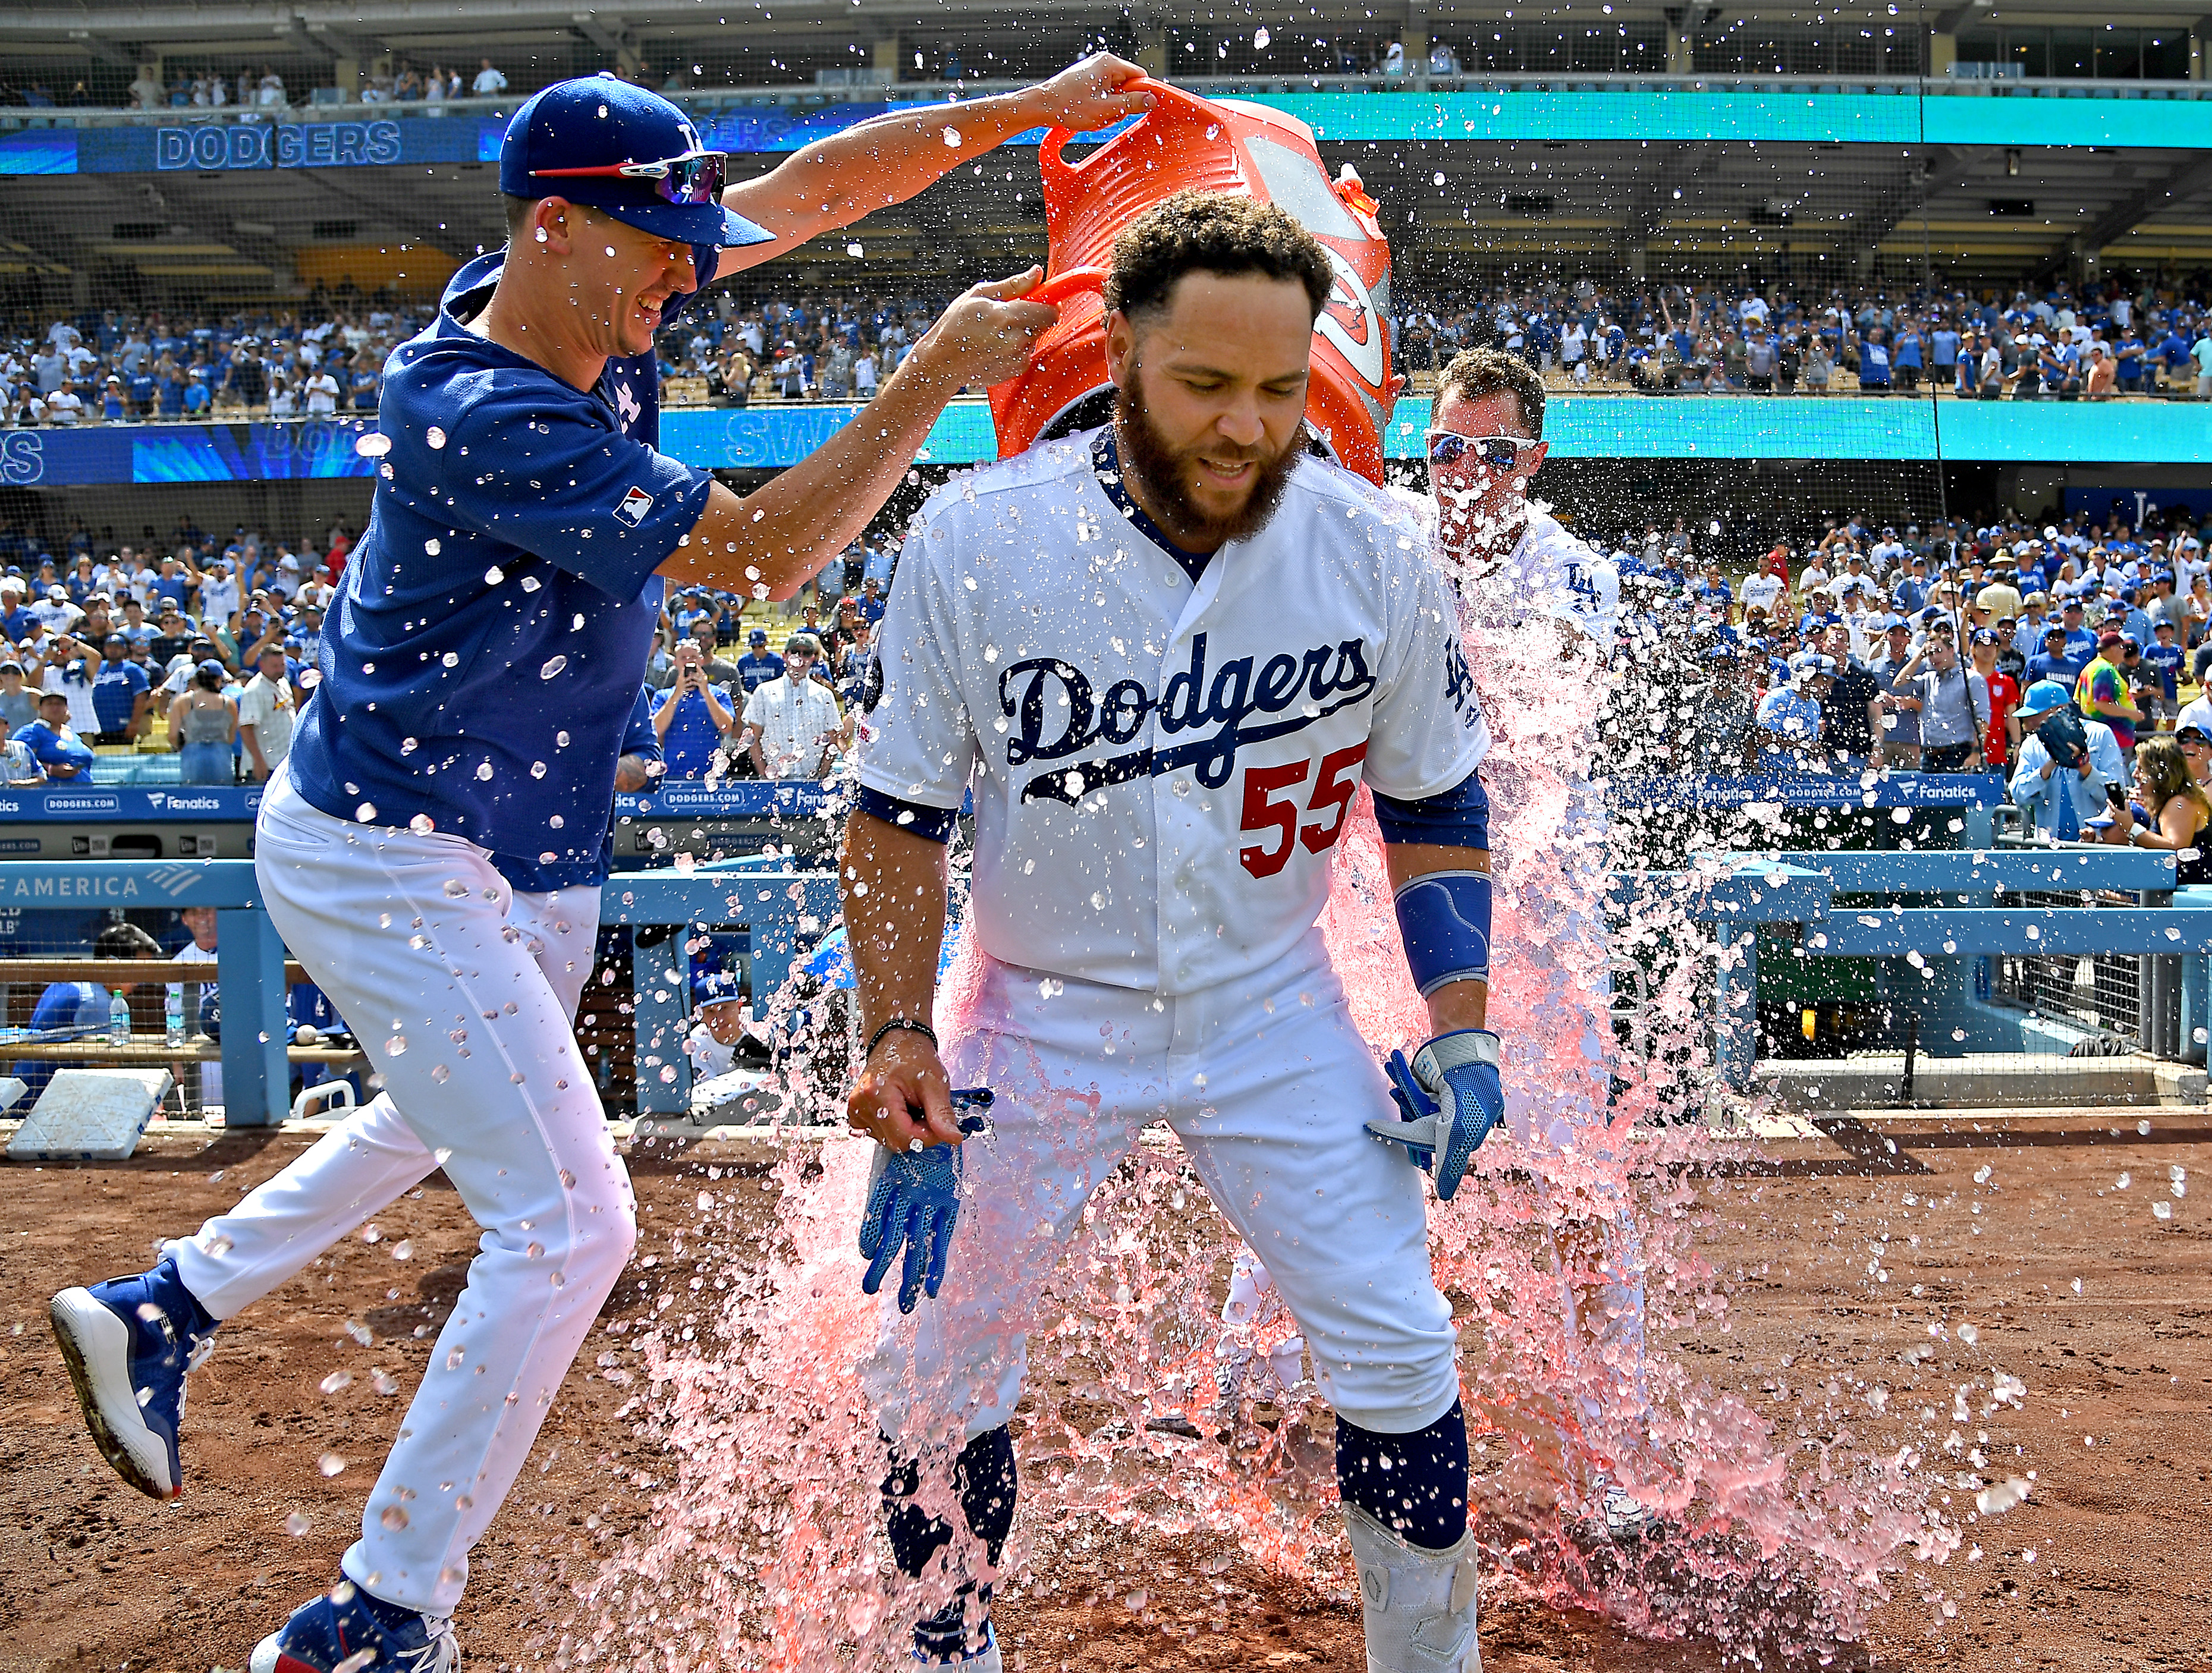 St Louis Cardinals v Los Angeles Dodgers, Russell Martin drenched after walk-off win.